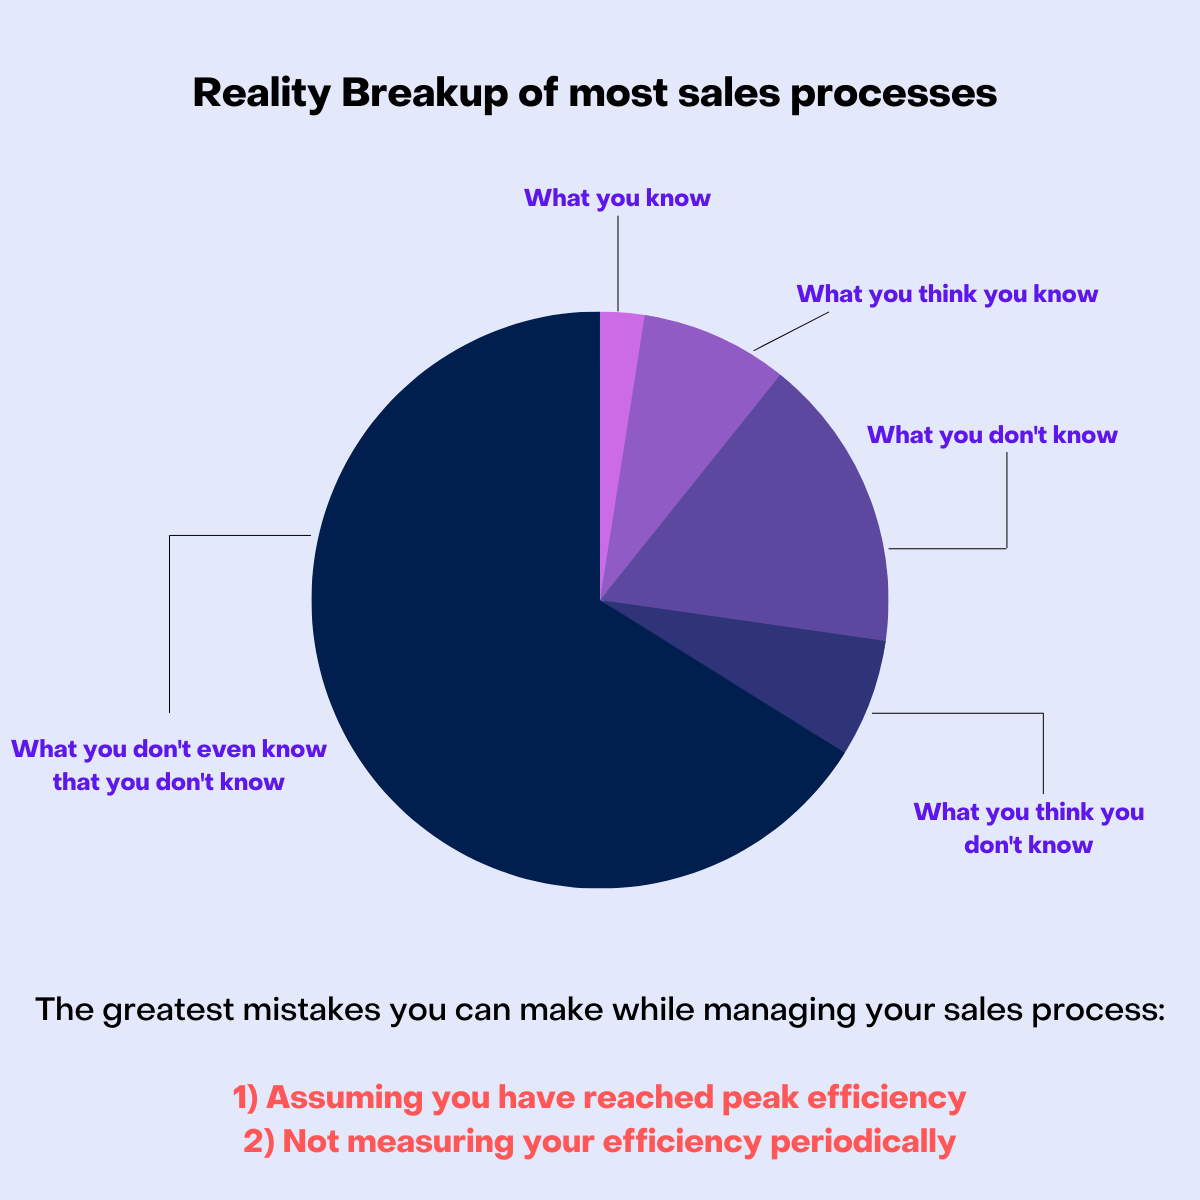 Reality breakup of most sales processes show why conversation intelligence is important.